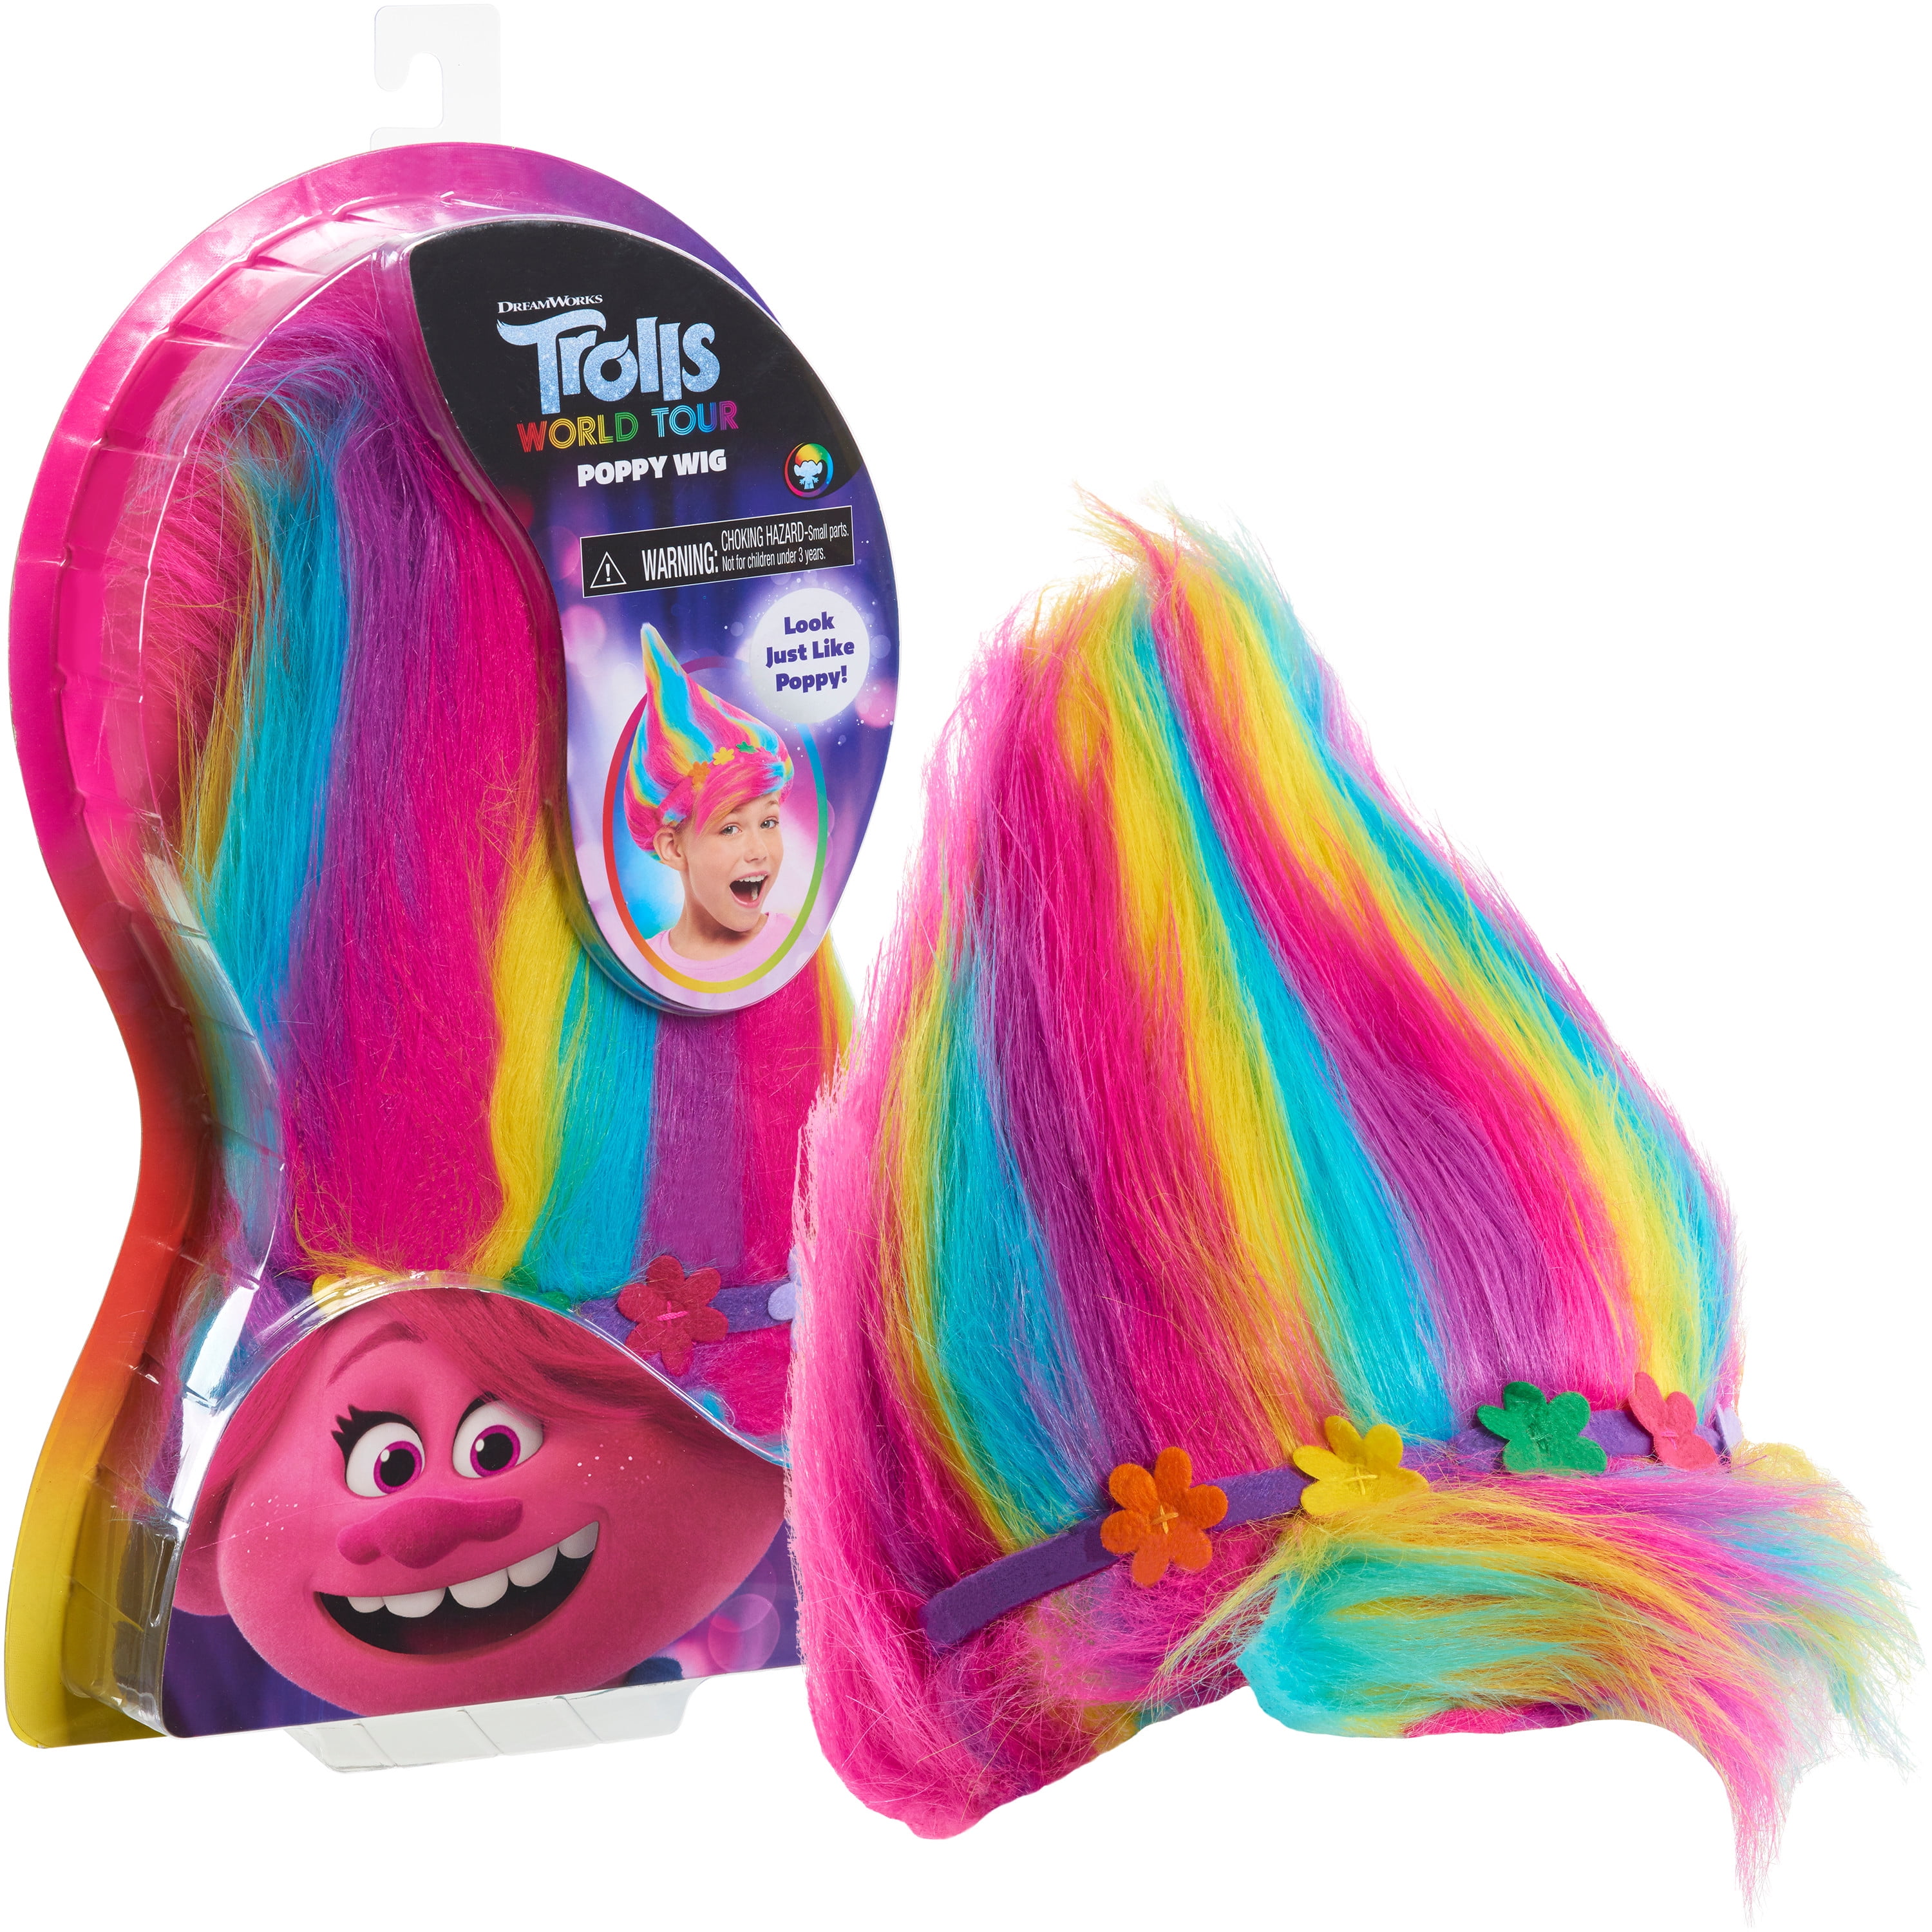 Trolls World Tour Troll-rific Poppy With Rainbow Hair Wig Ages 3 Multicolor for sale online 